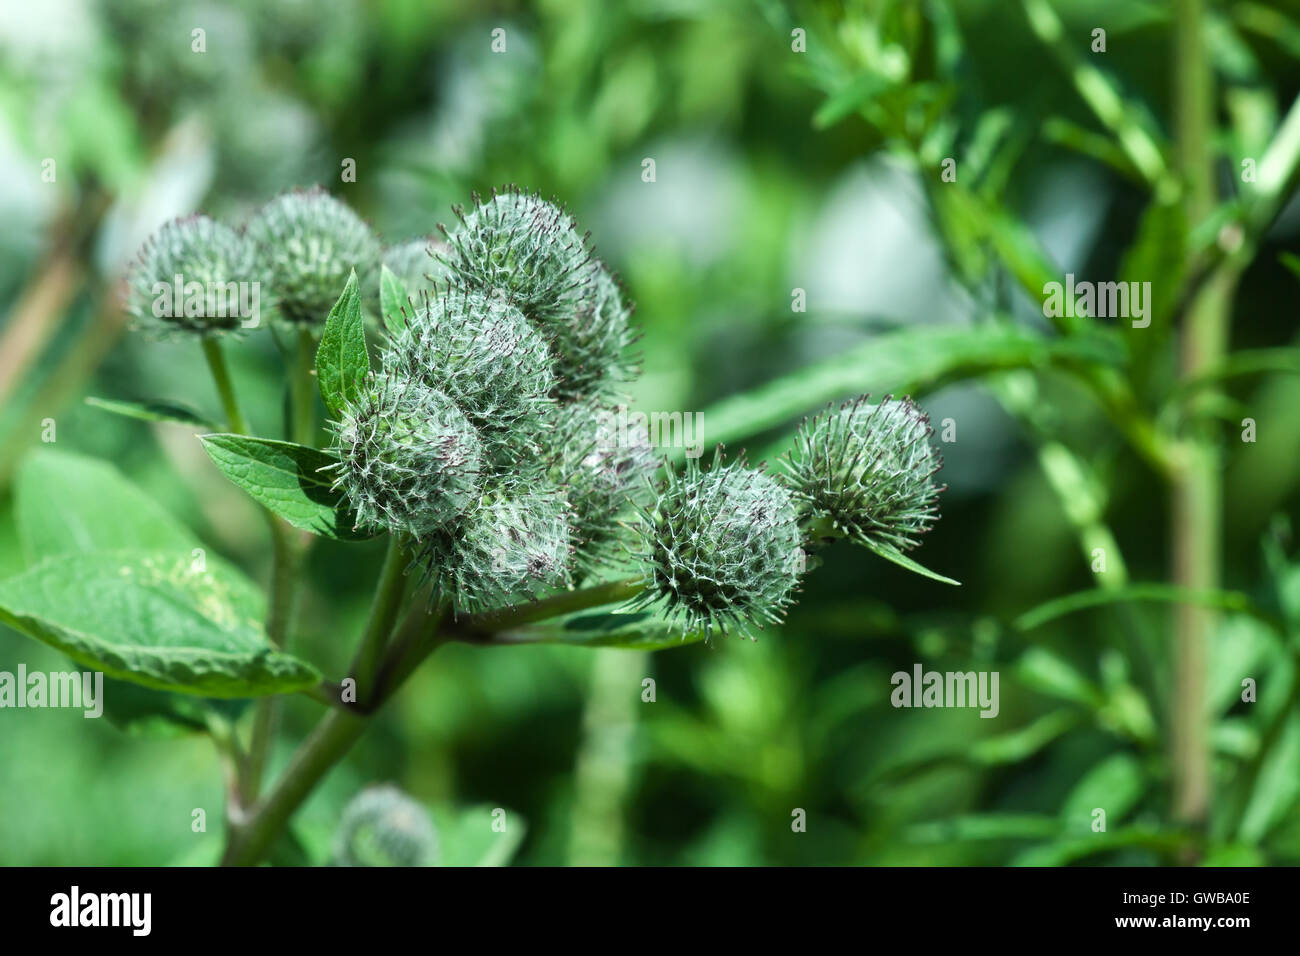 Natural environmental seasonal image: burdock (agrimony) close up with green background of other plants. Stock Photo